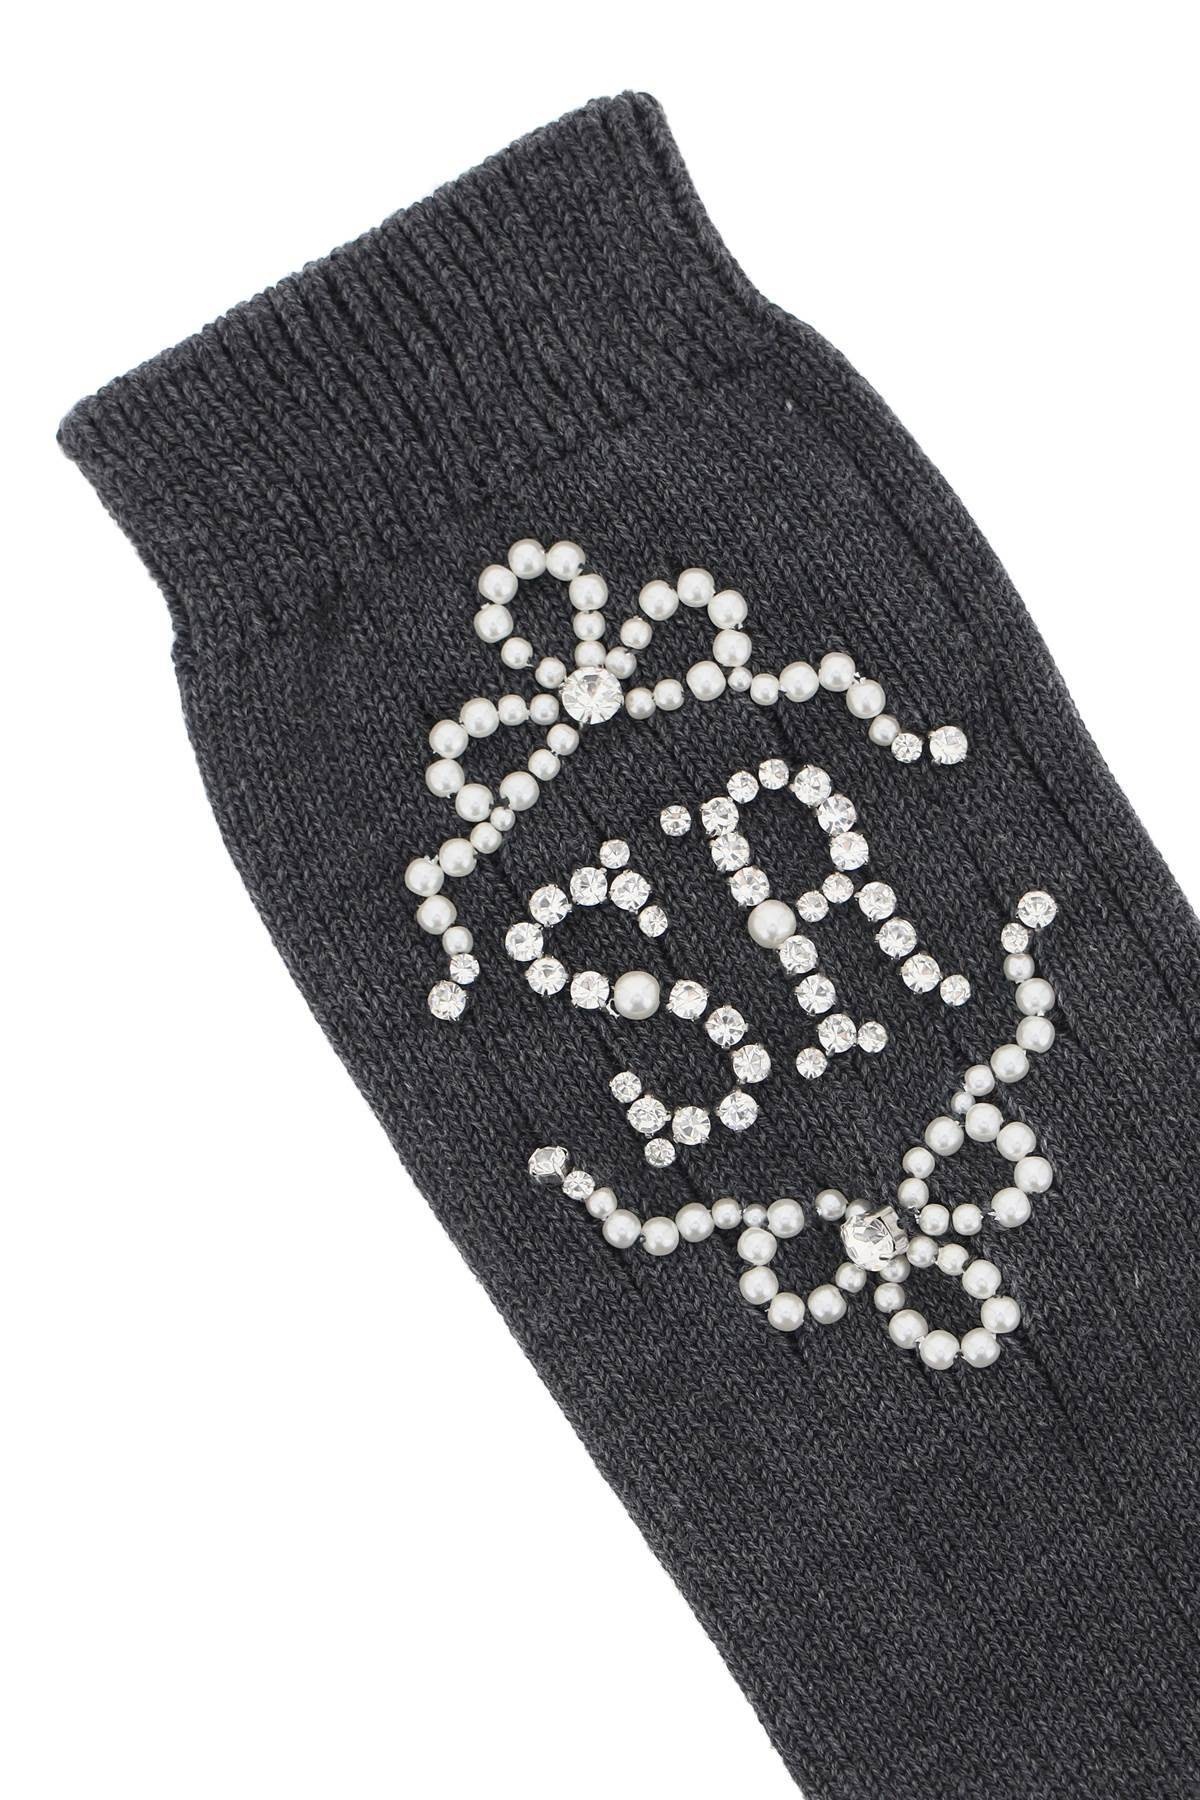 SR SOCKS WITH PEARLS AND CRYSTALS - 3